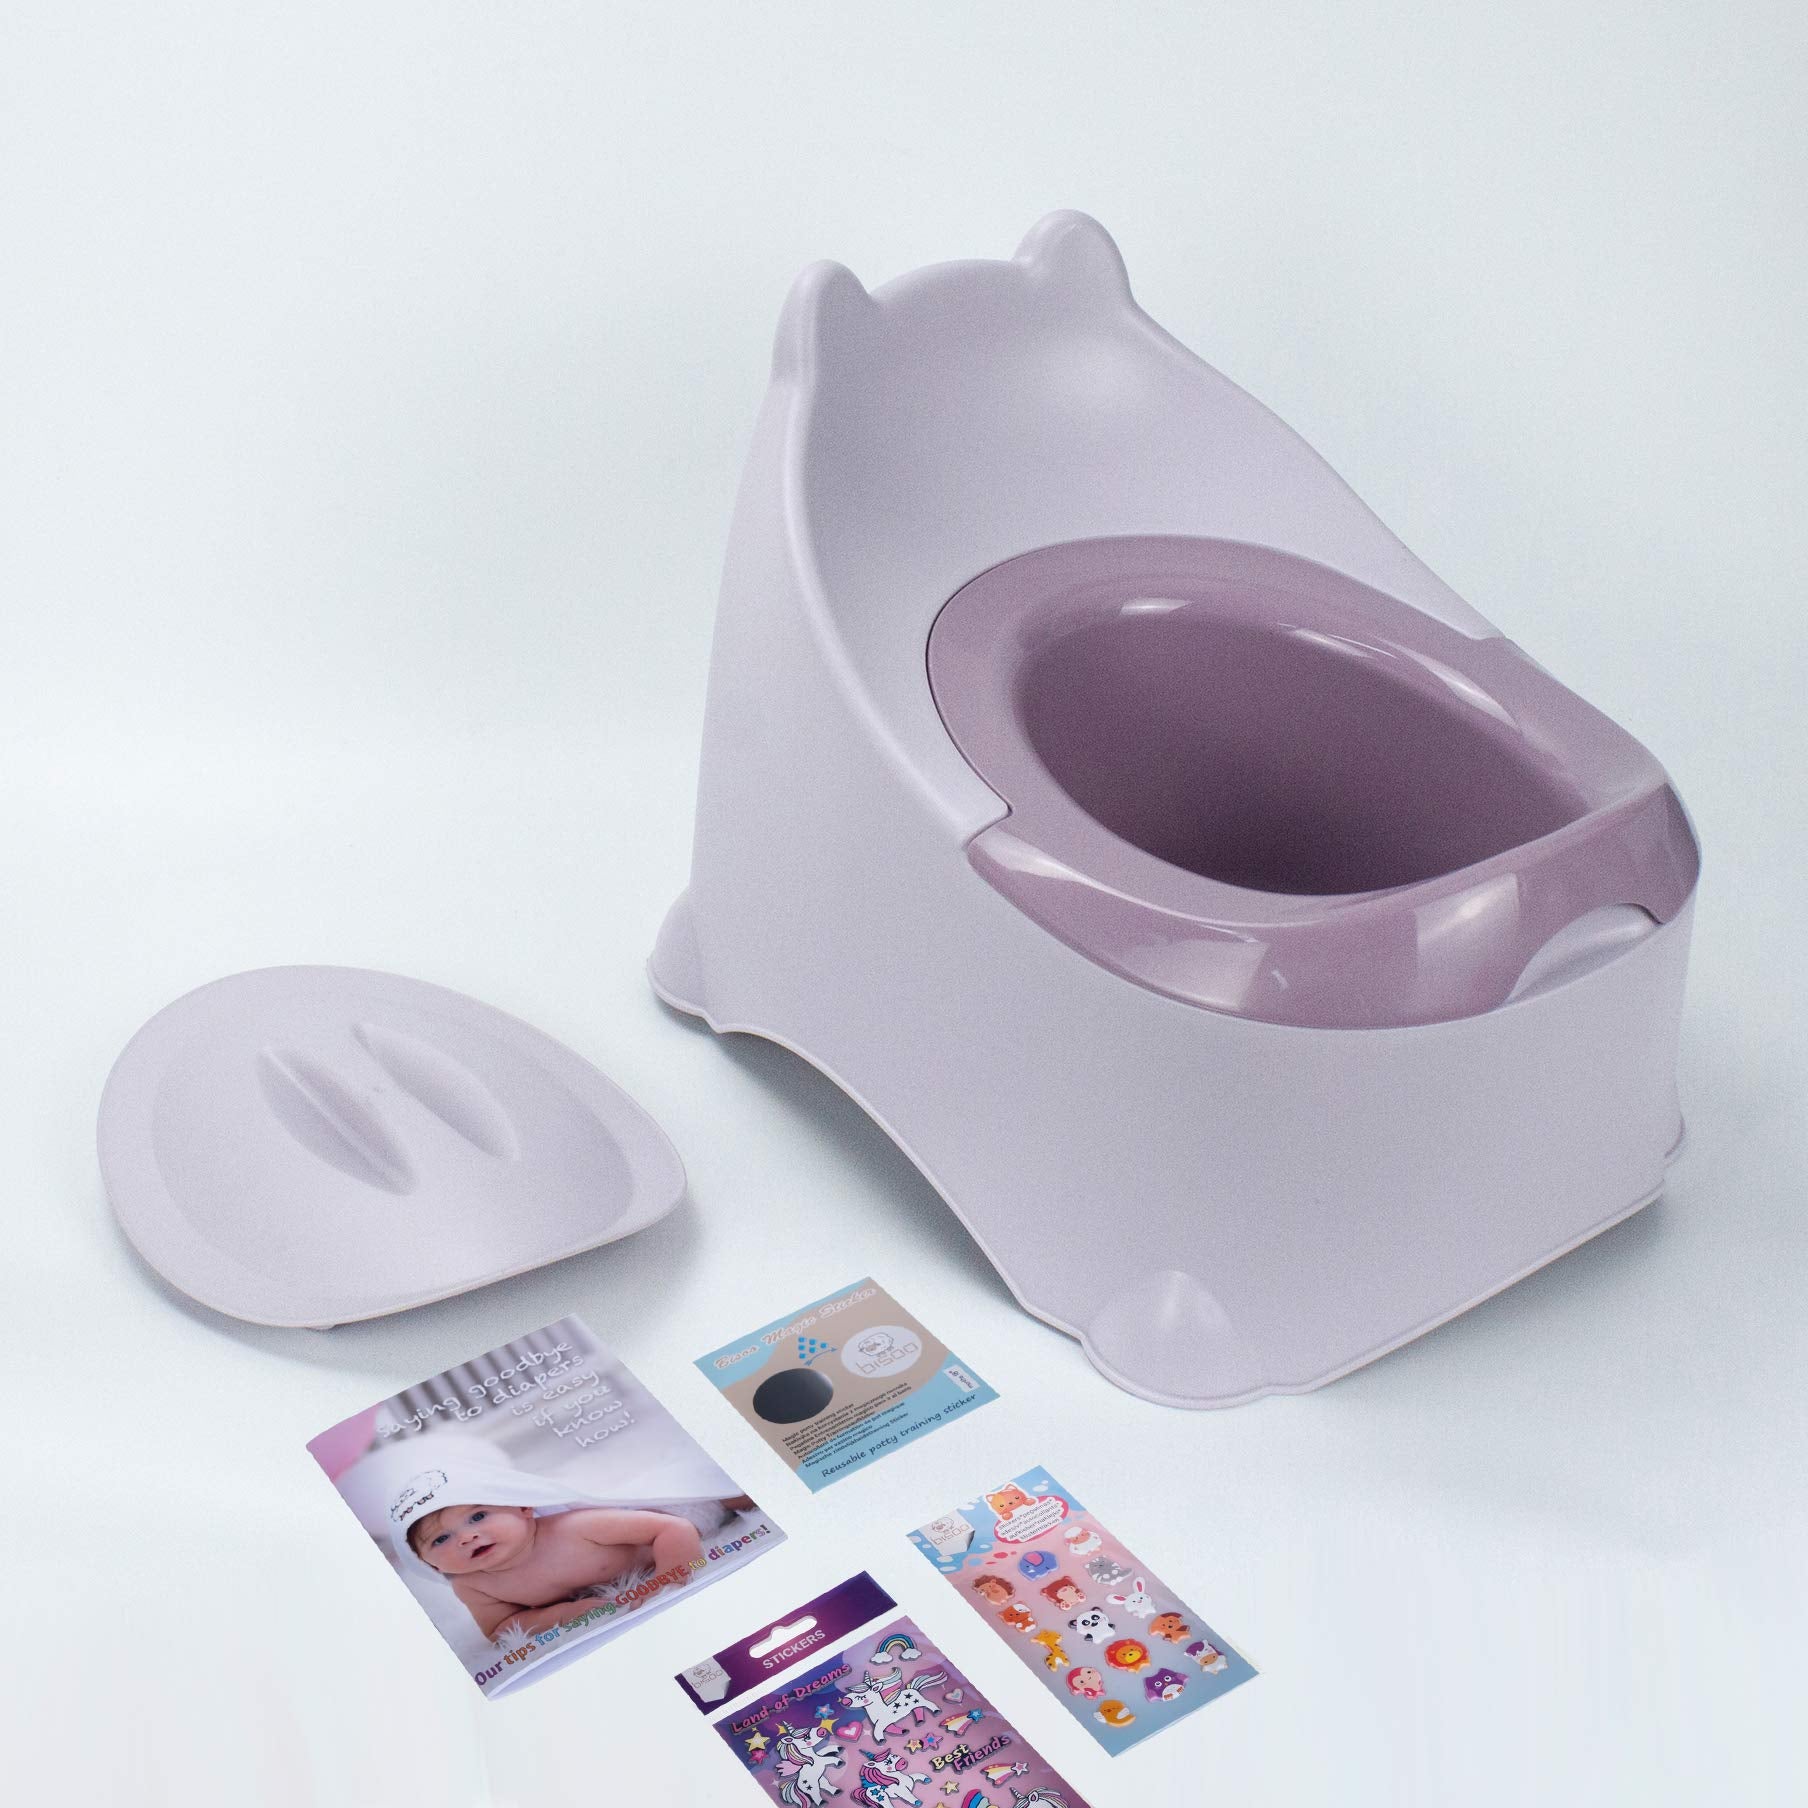 BISOO Potty - Babies +2 Years - for Girls and Boys - Compact and Portable Toilet - Easy to Clean - Includes 3 Gifts (Our Tips + 1 Magic Sticker + 2 Sets of Stickers) Pink